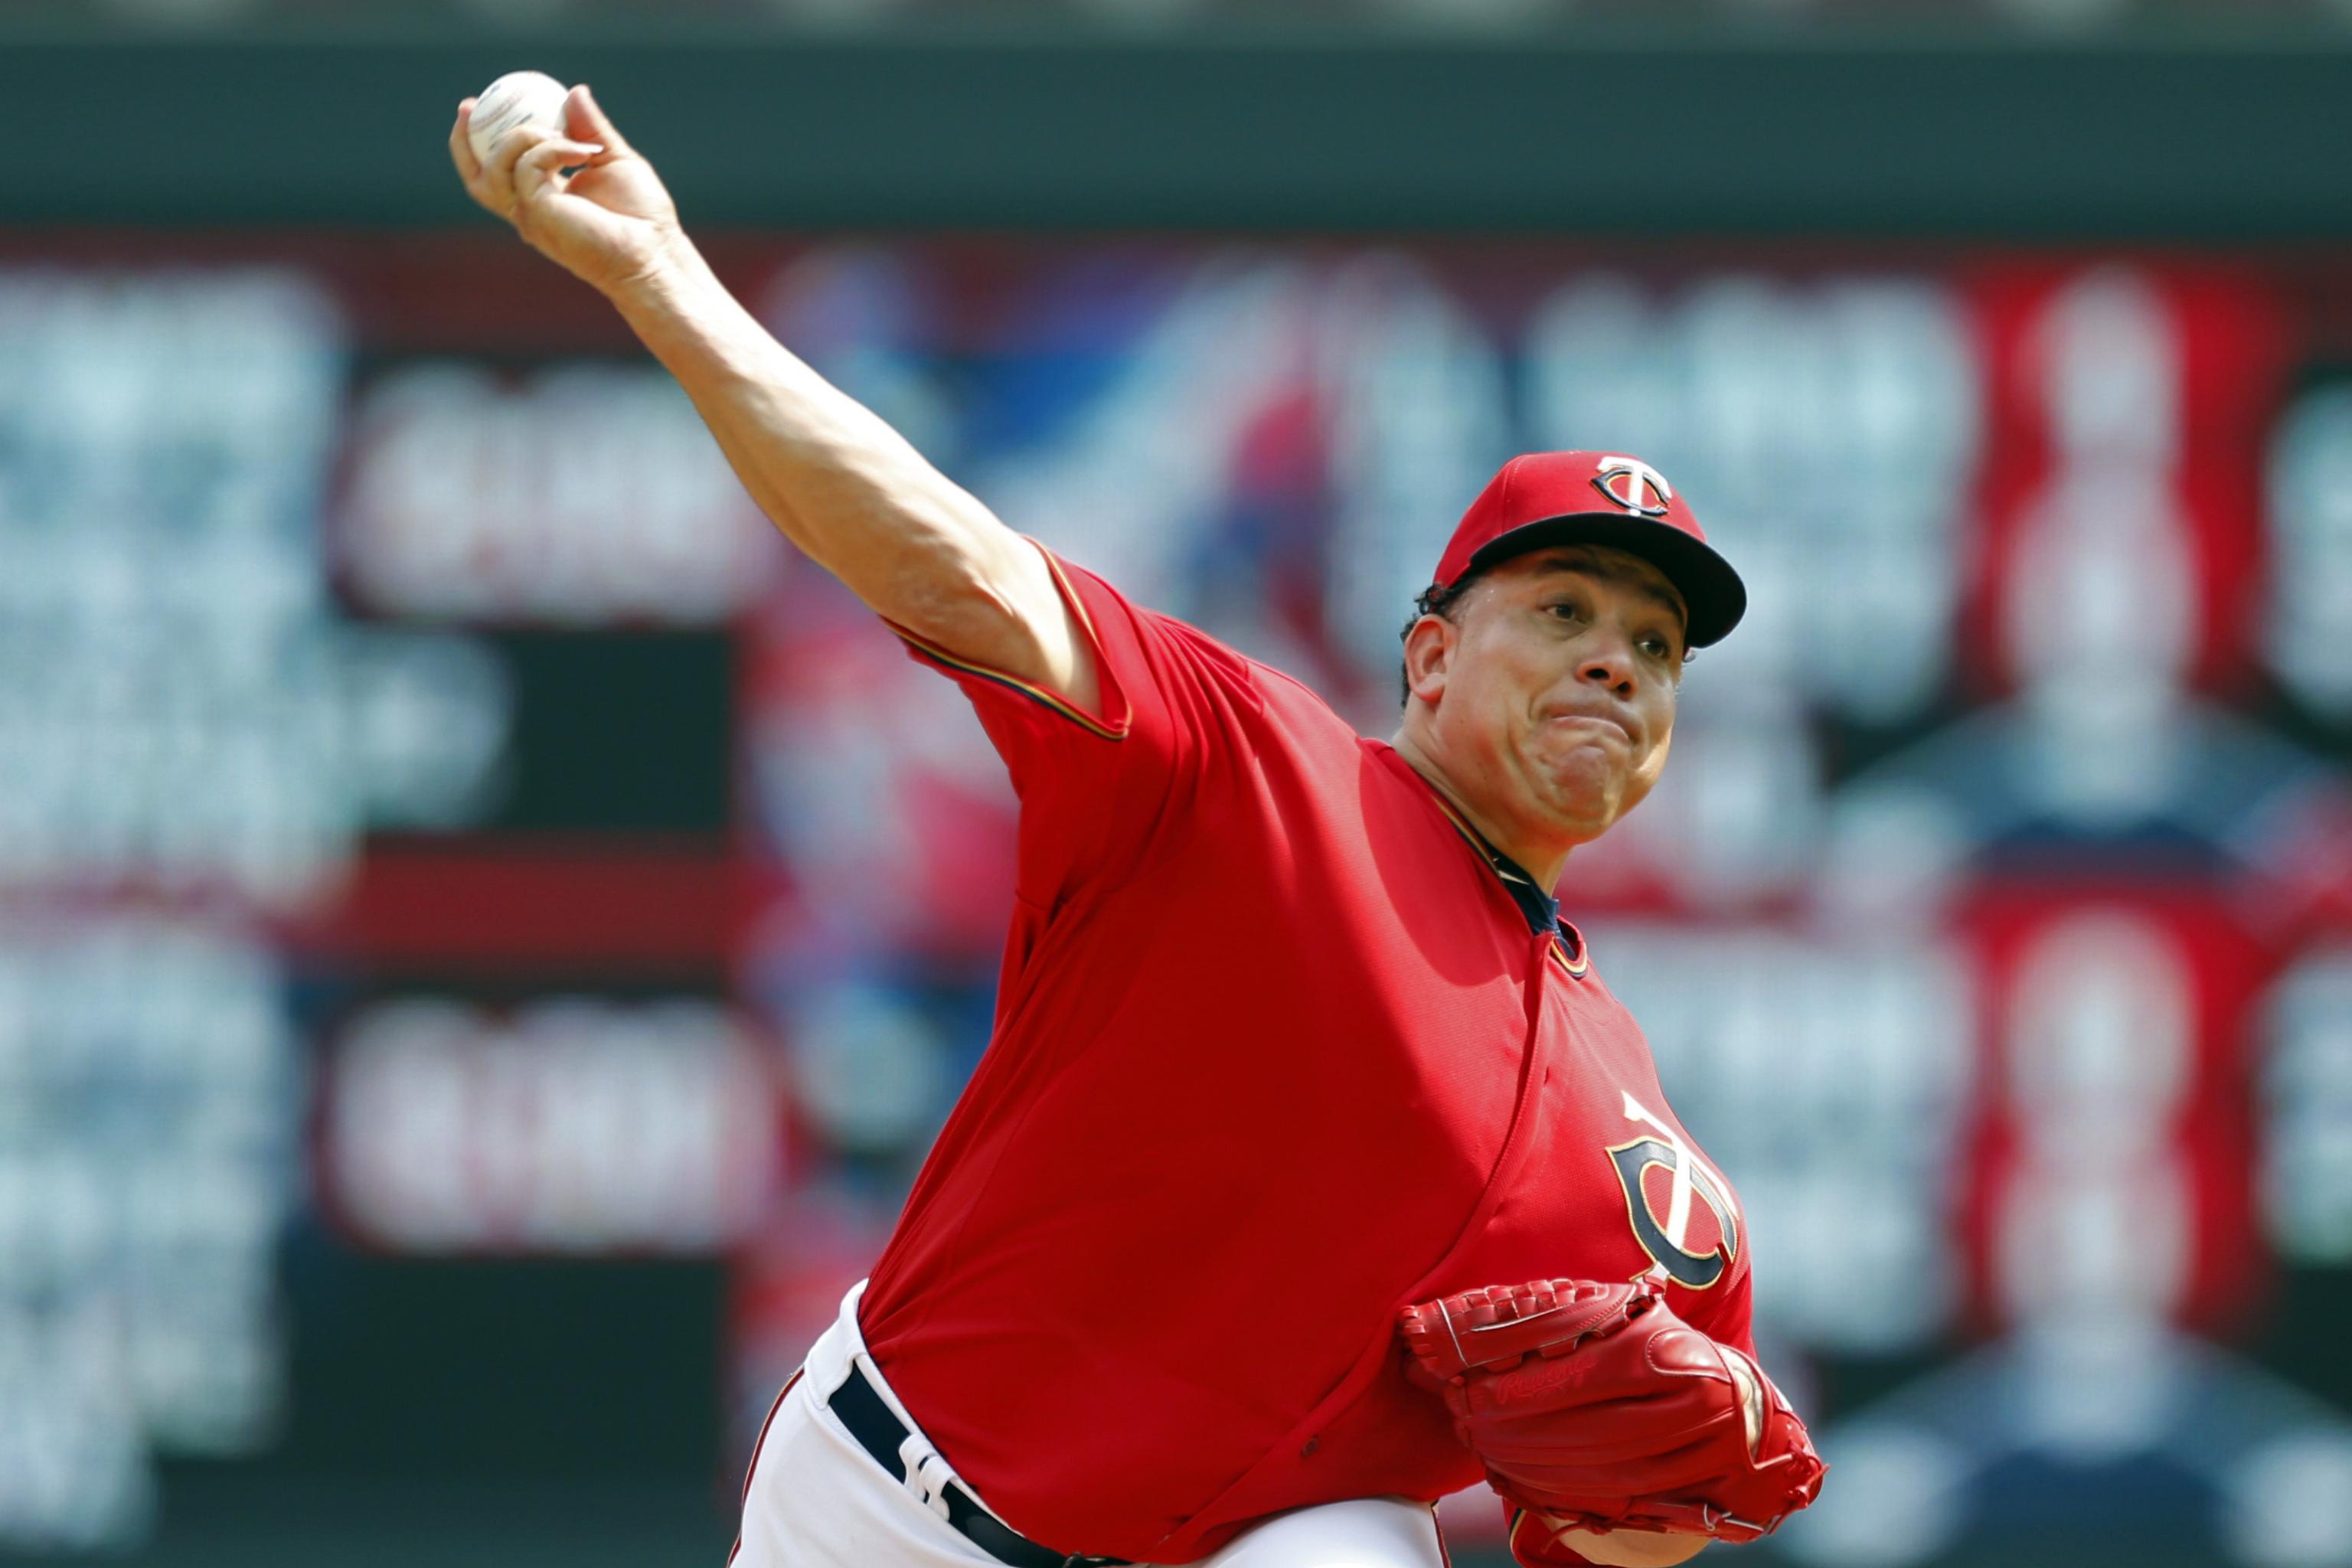 Bartolo Colon Becomes 18th Pitcher to Defeat All 30 MLB Teams